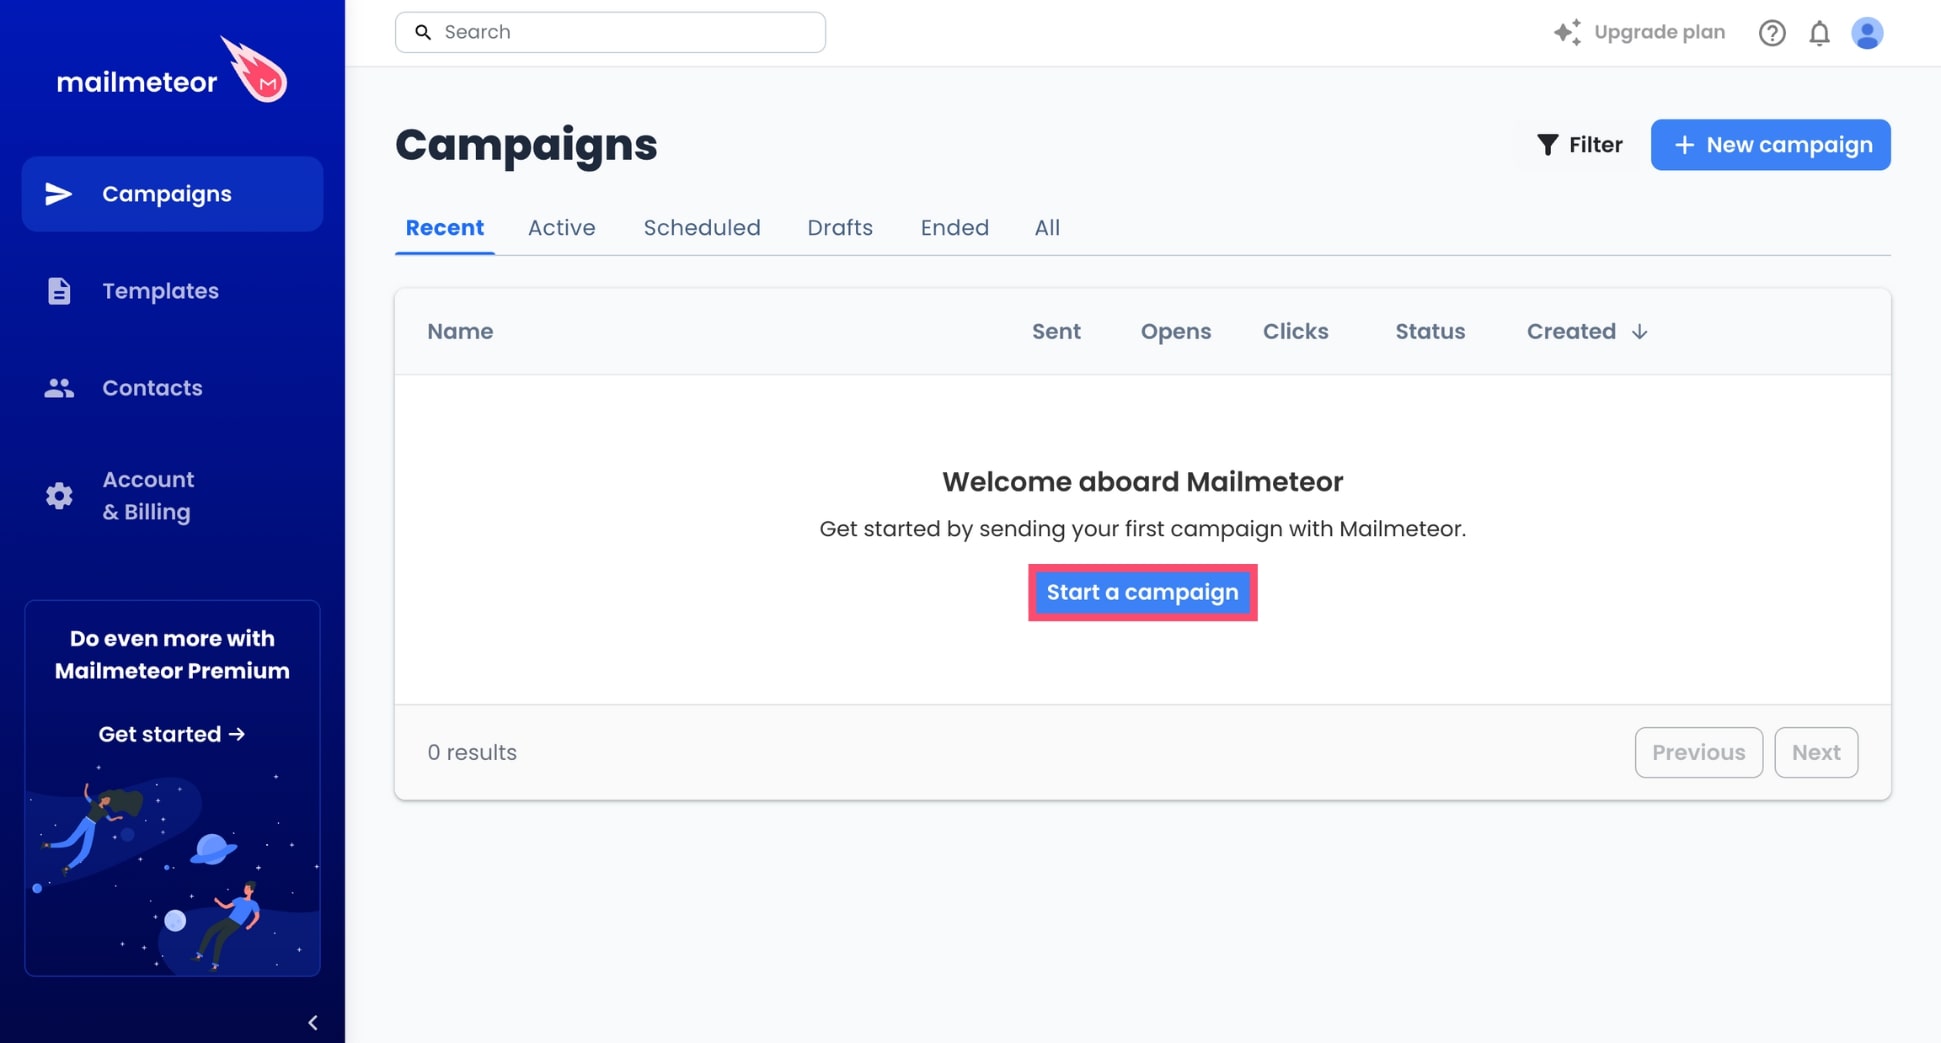 Start a new campaign in Mailmeteor